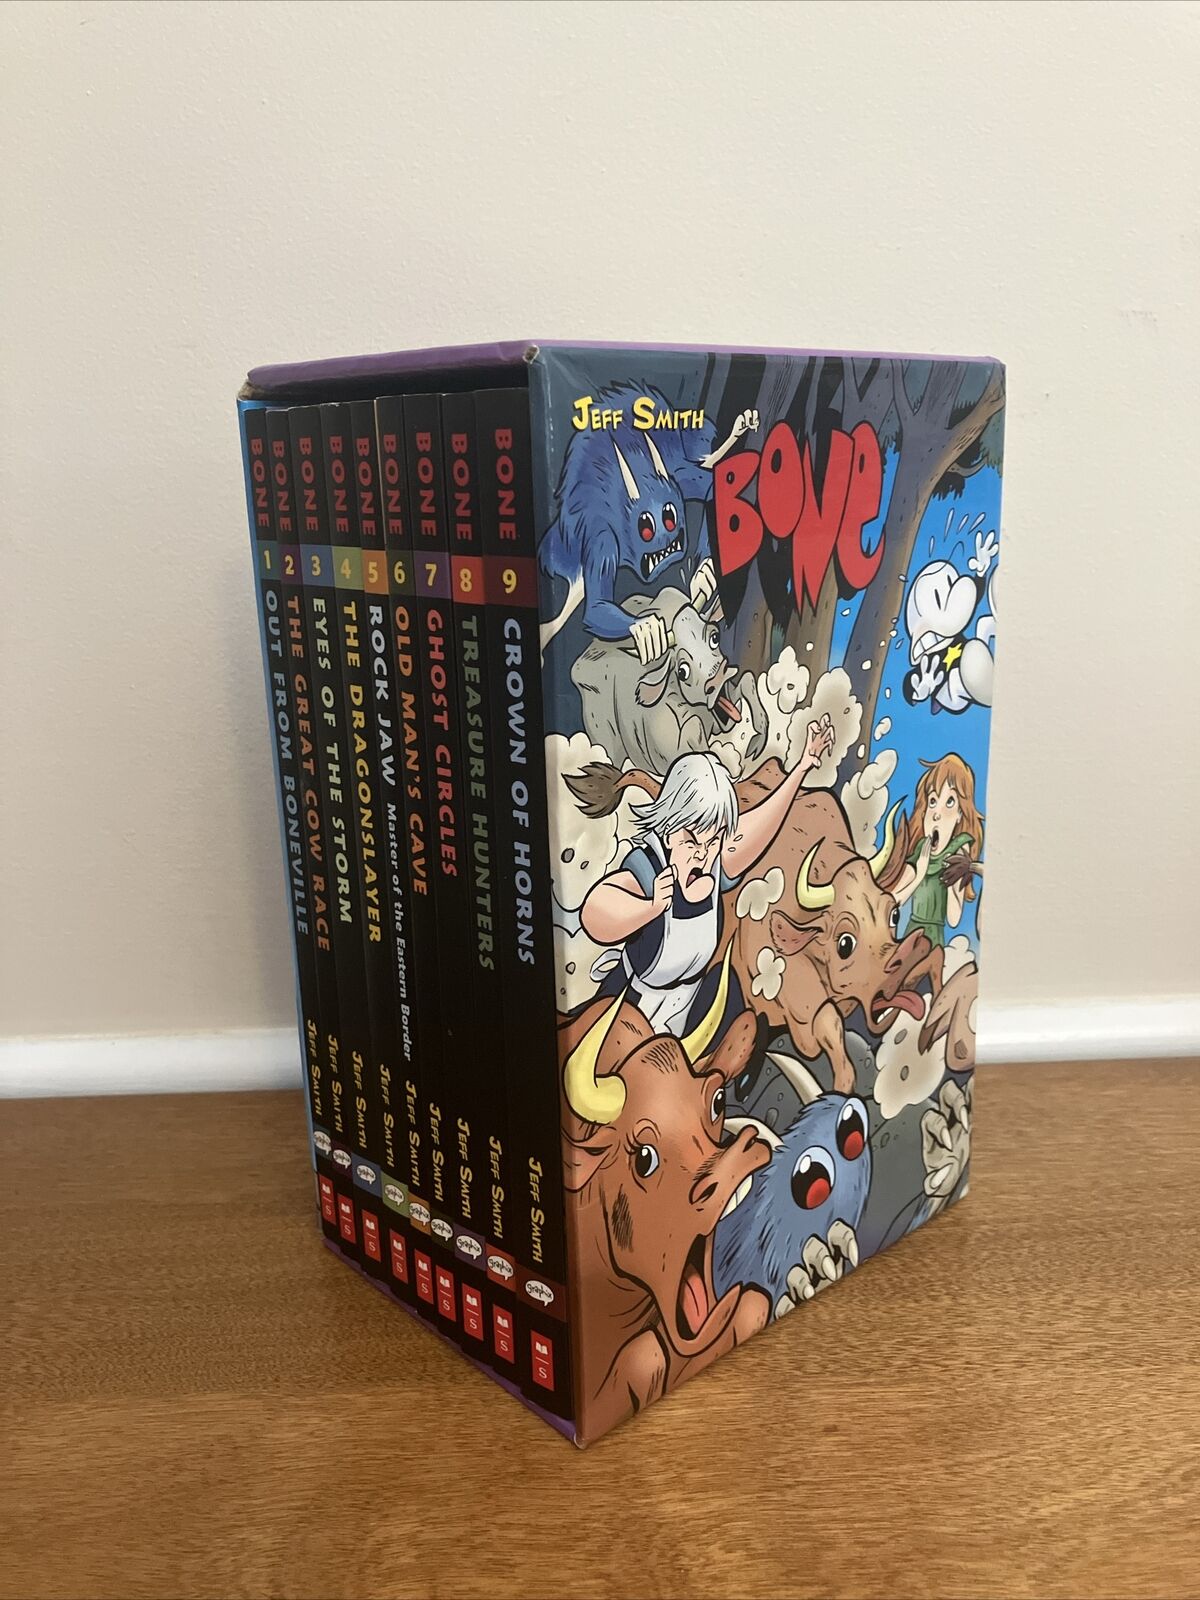 BONE Book Set Volumes 1 - 9 in Slipcase By Jeff Smith Graphic Novels